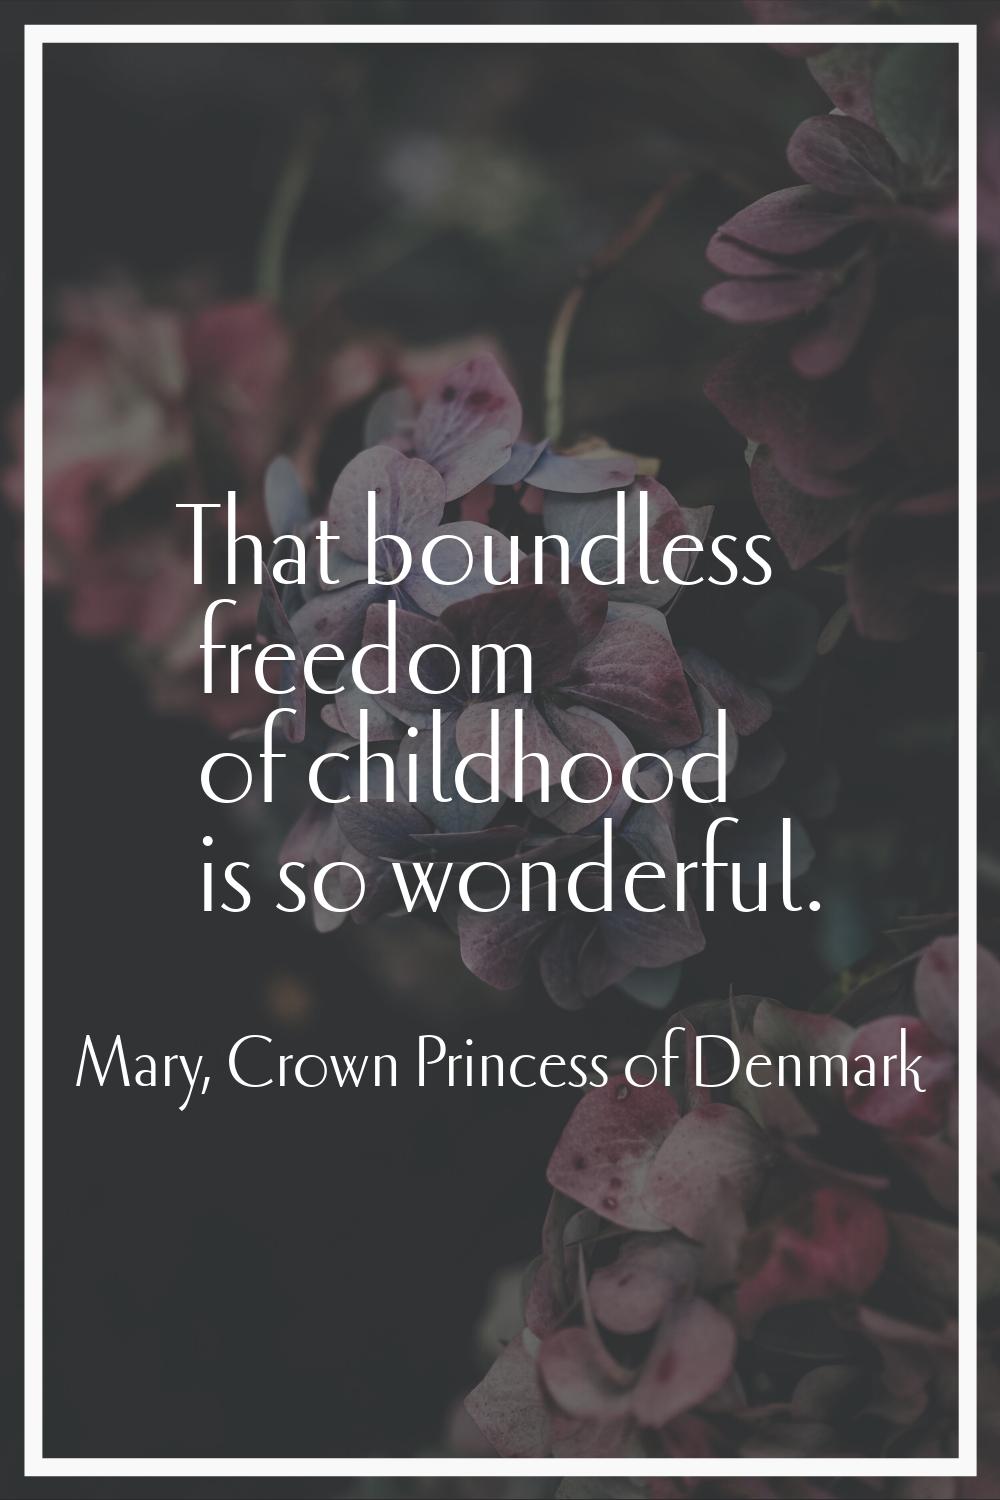 That boundless freedom of childhood is so wonderful.